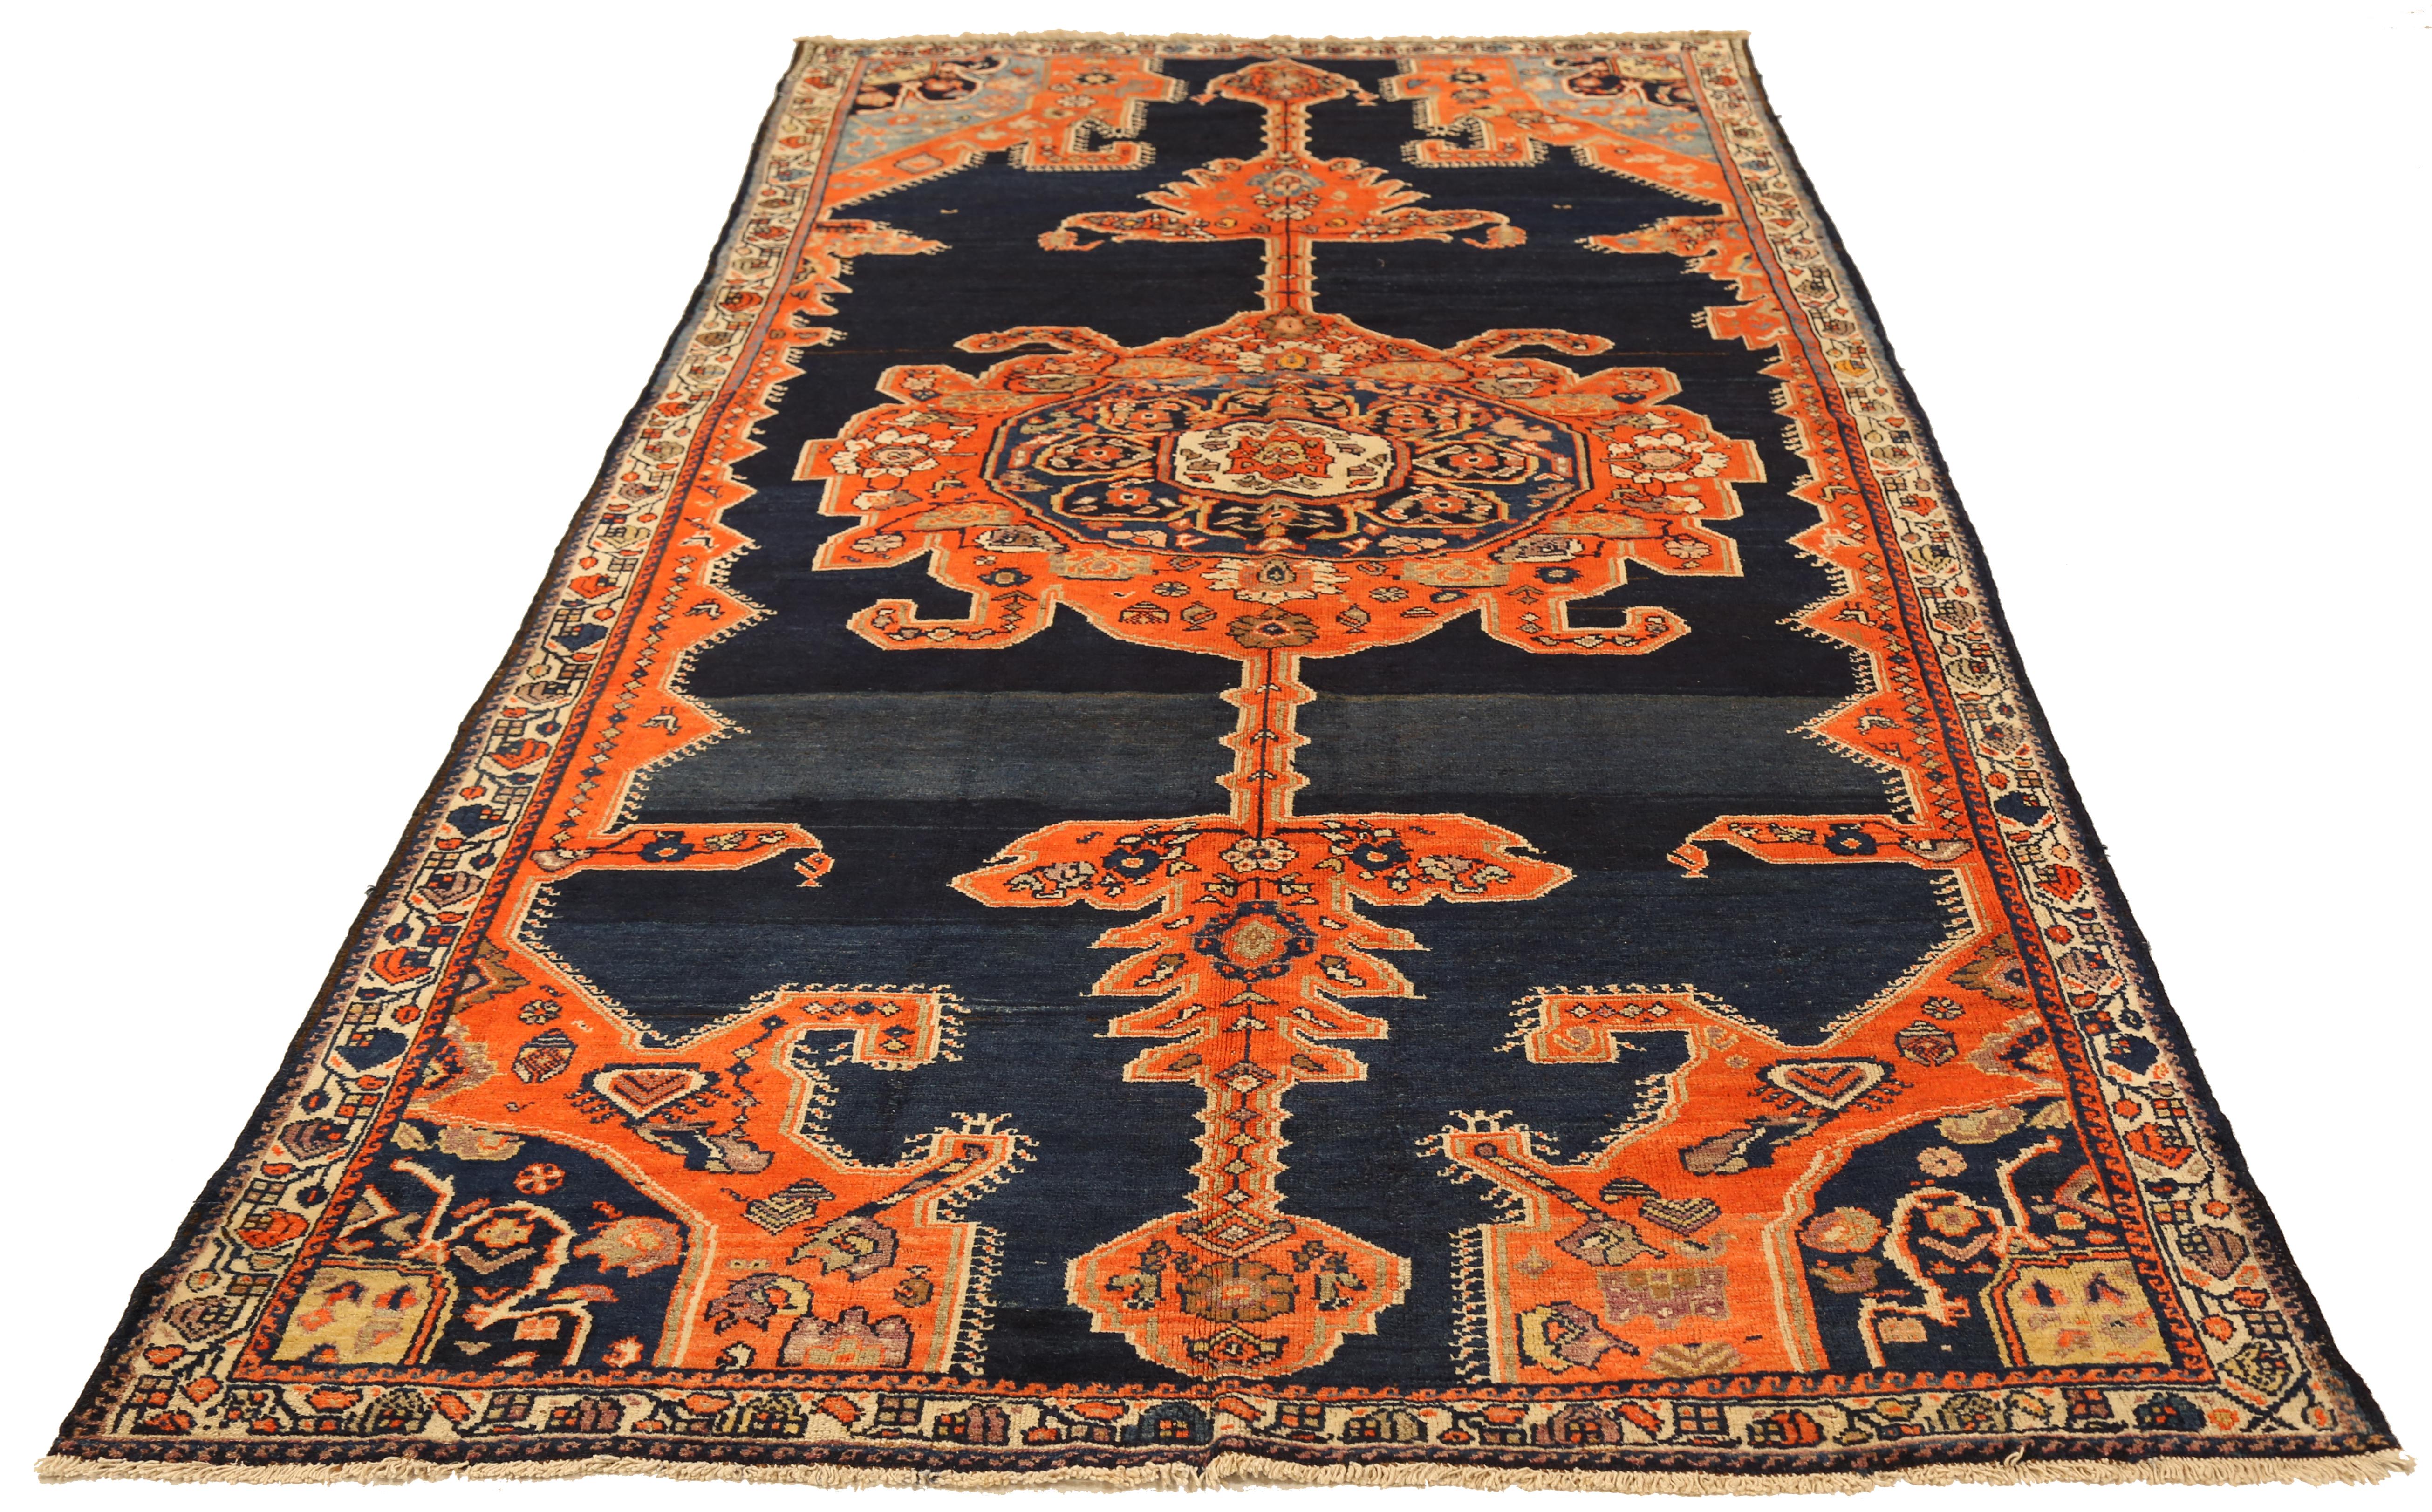 Mid-20th century hand-woven Persian area rug made from fine wool and all-natural vegetable dyes that are safe for people and pets. This piece is a Malayer weaving which is often centered on elaborate 'Boteh' patterns that represents life and